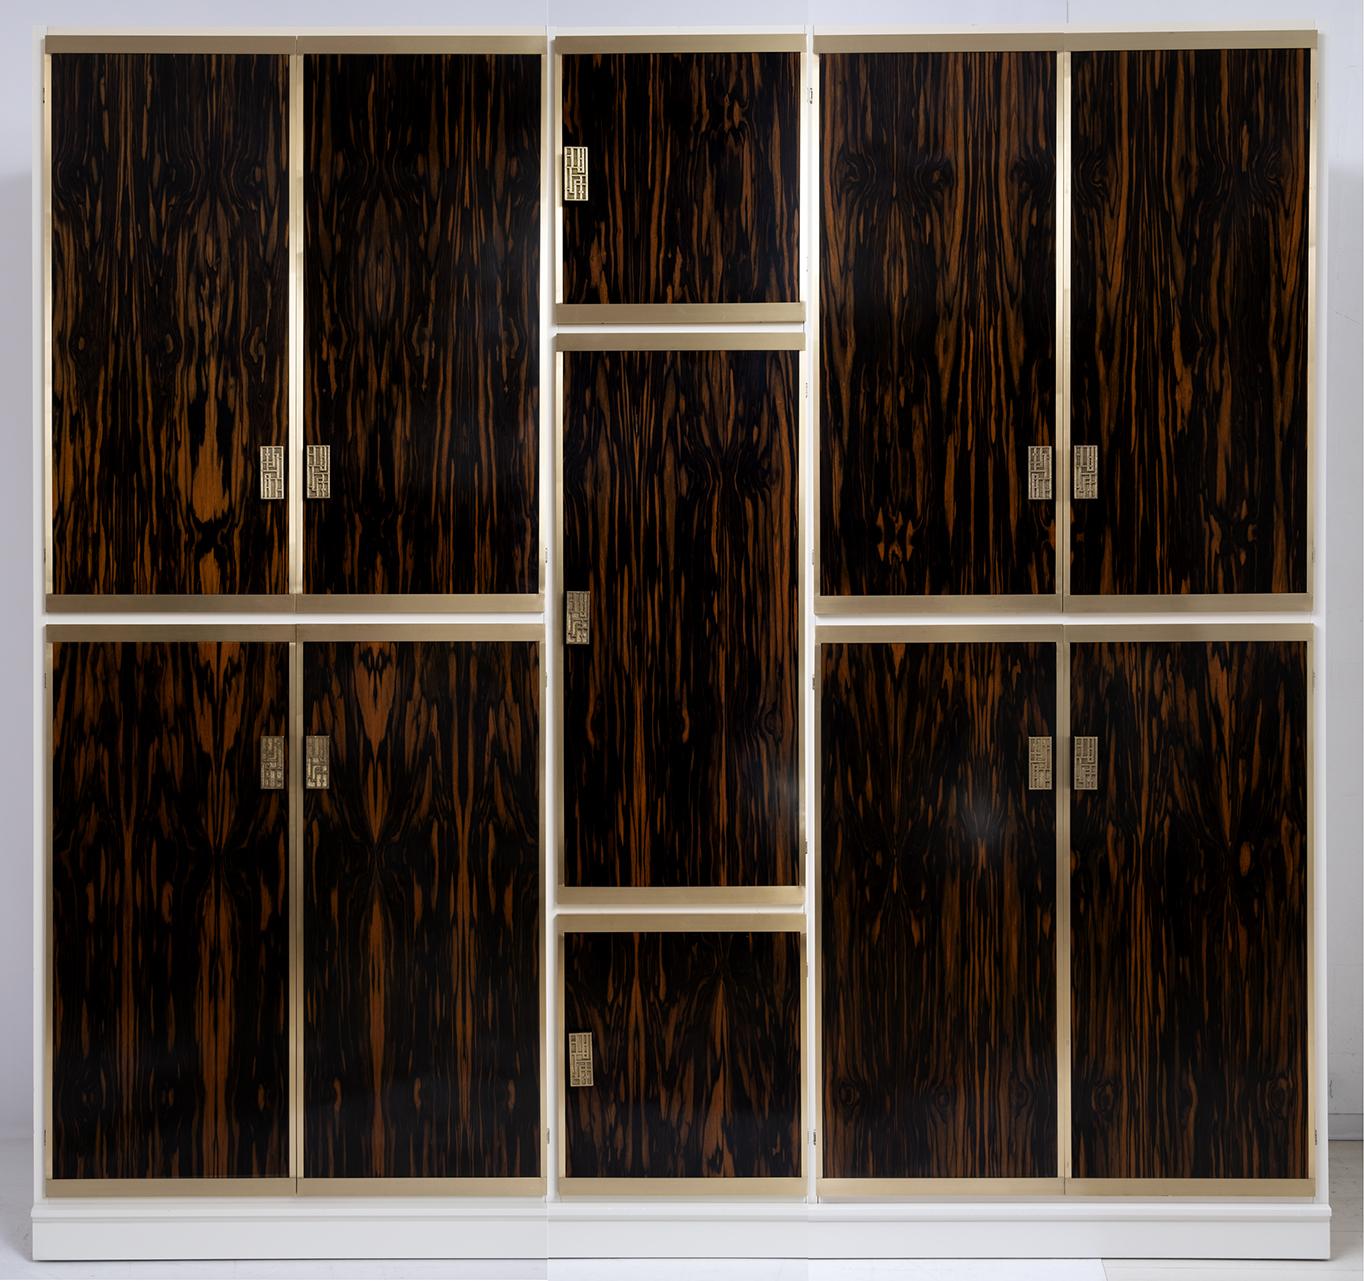 Designed by Luciano Frigerio, wardrobe with eleven doors in brass and walnut wood, Macassar ebony is a precious essence that is widely used in cabinet making, fine carpentry, turning and in the manufacture of musical instruments. Due to its merits,